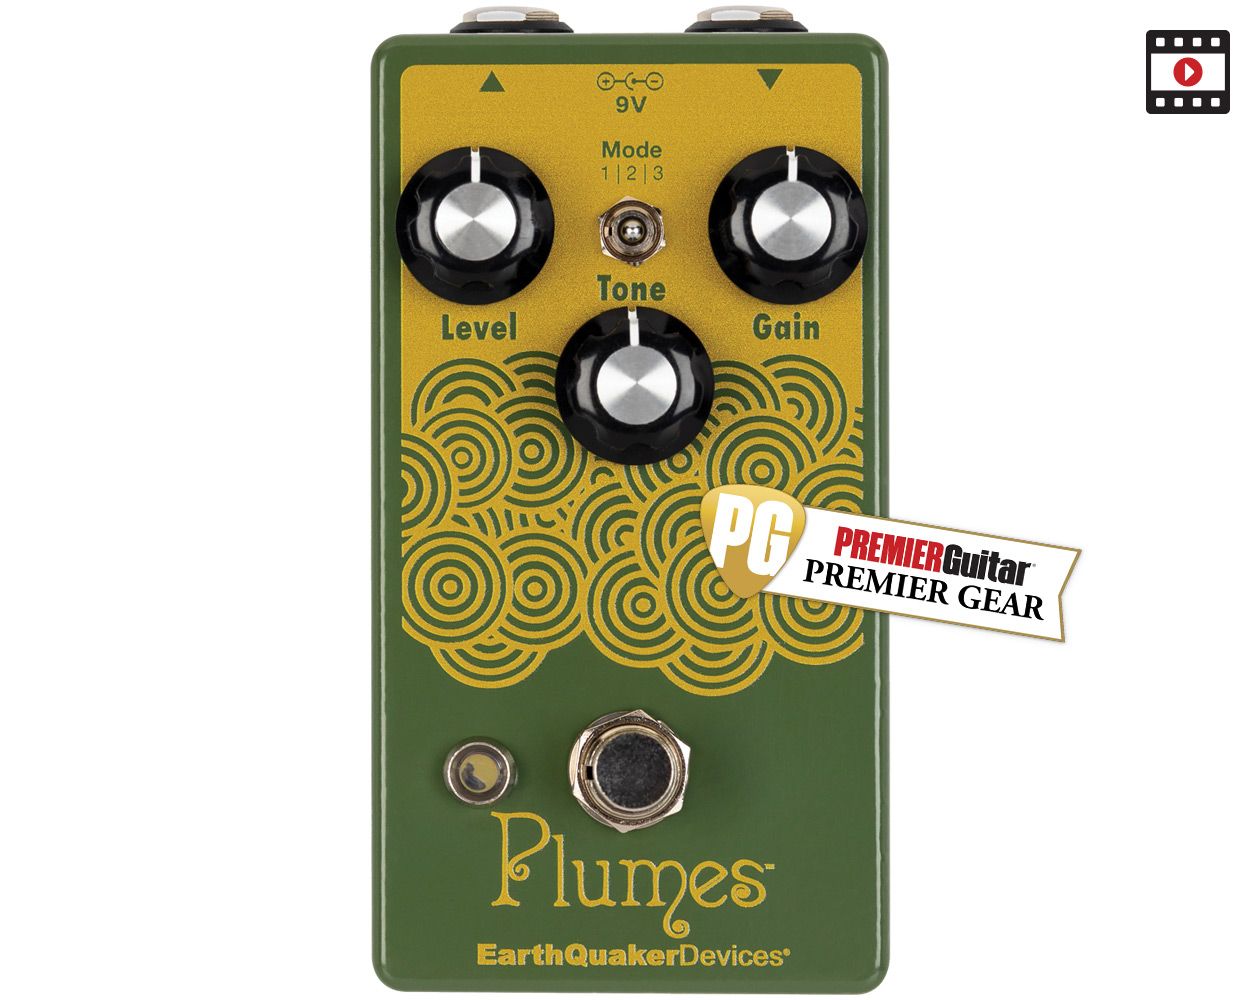 EarthQuaker Devices Plumes Review